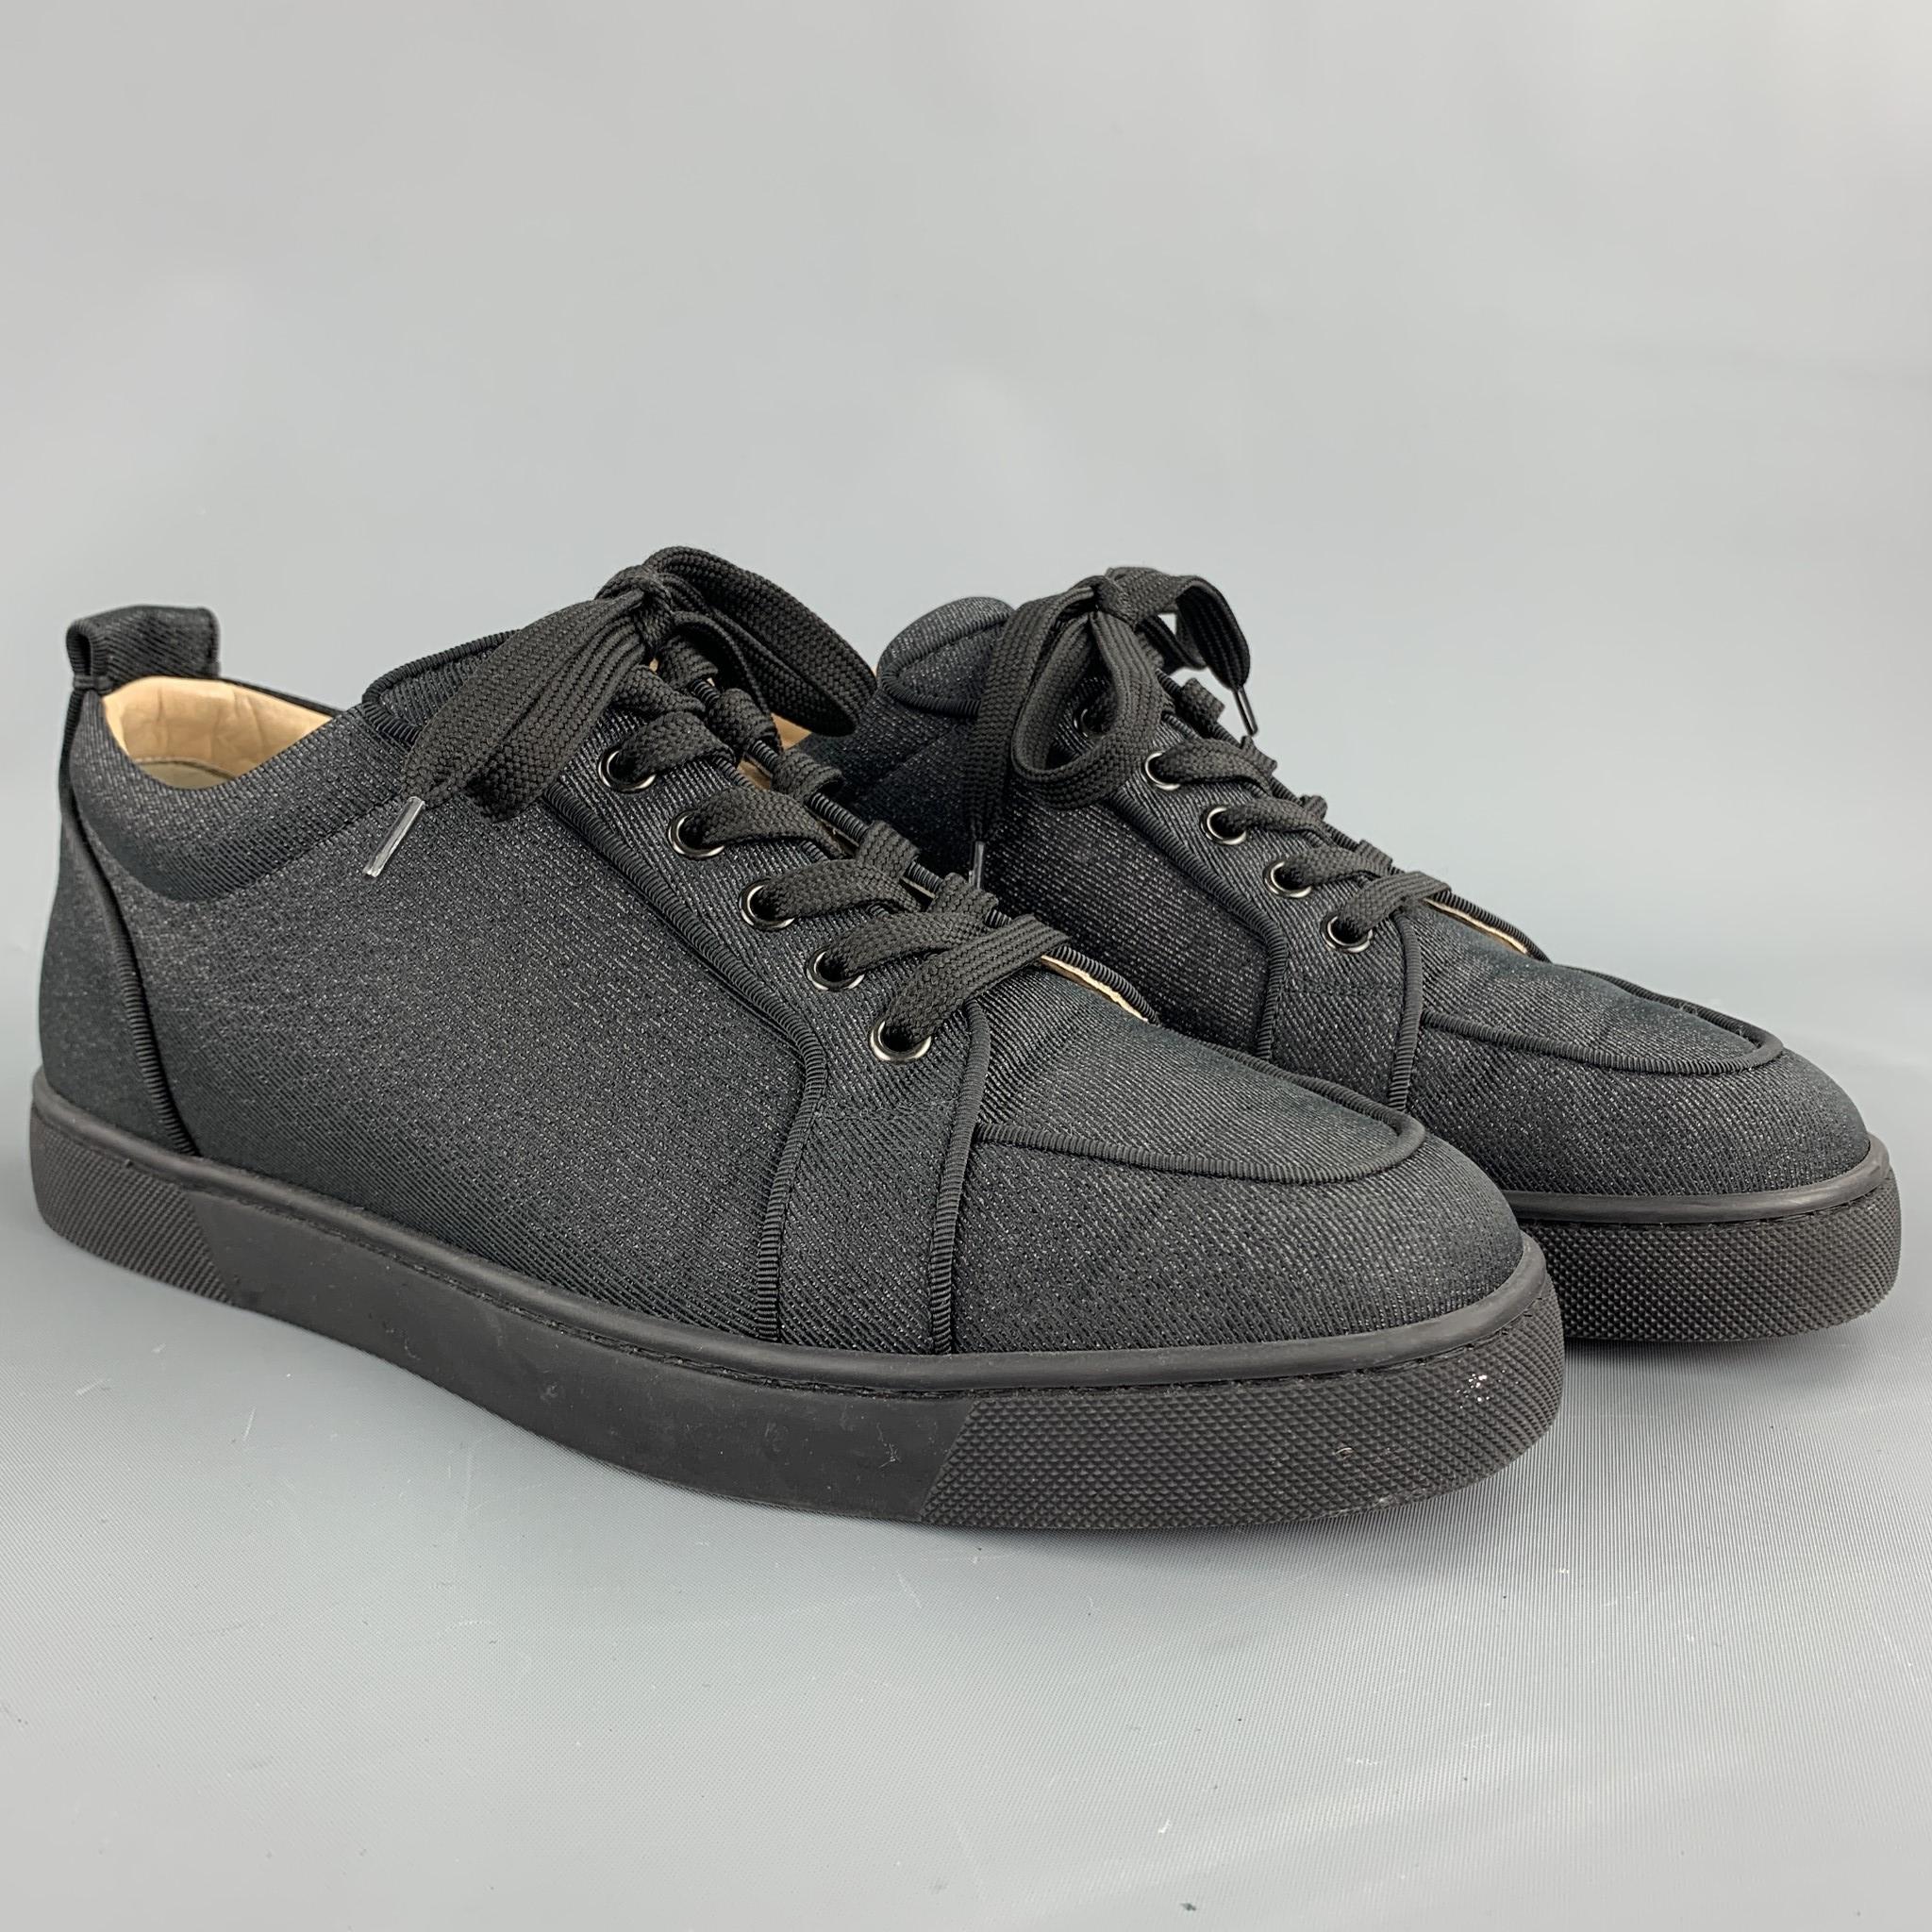 CHRISTIAN LOUBOUTIN sneakers comes in a black lurex denim featuring red rubber sole and a lace up closure. Comes with box. 

Excellent Pre-Owned Condition.
Marked: EU 42
Original Retail Price: $795.00

Outsole:

11 in. x 4 in. 